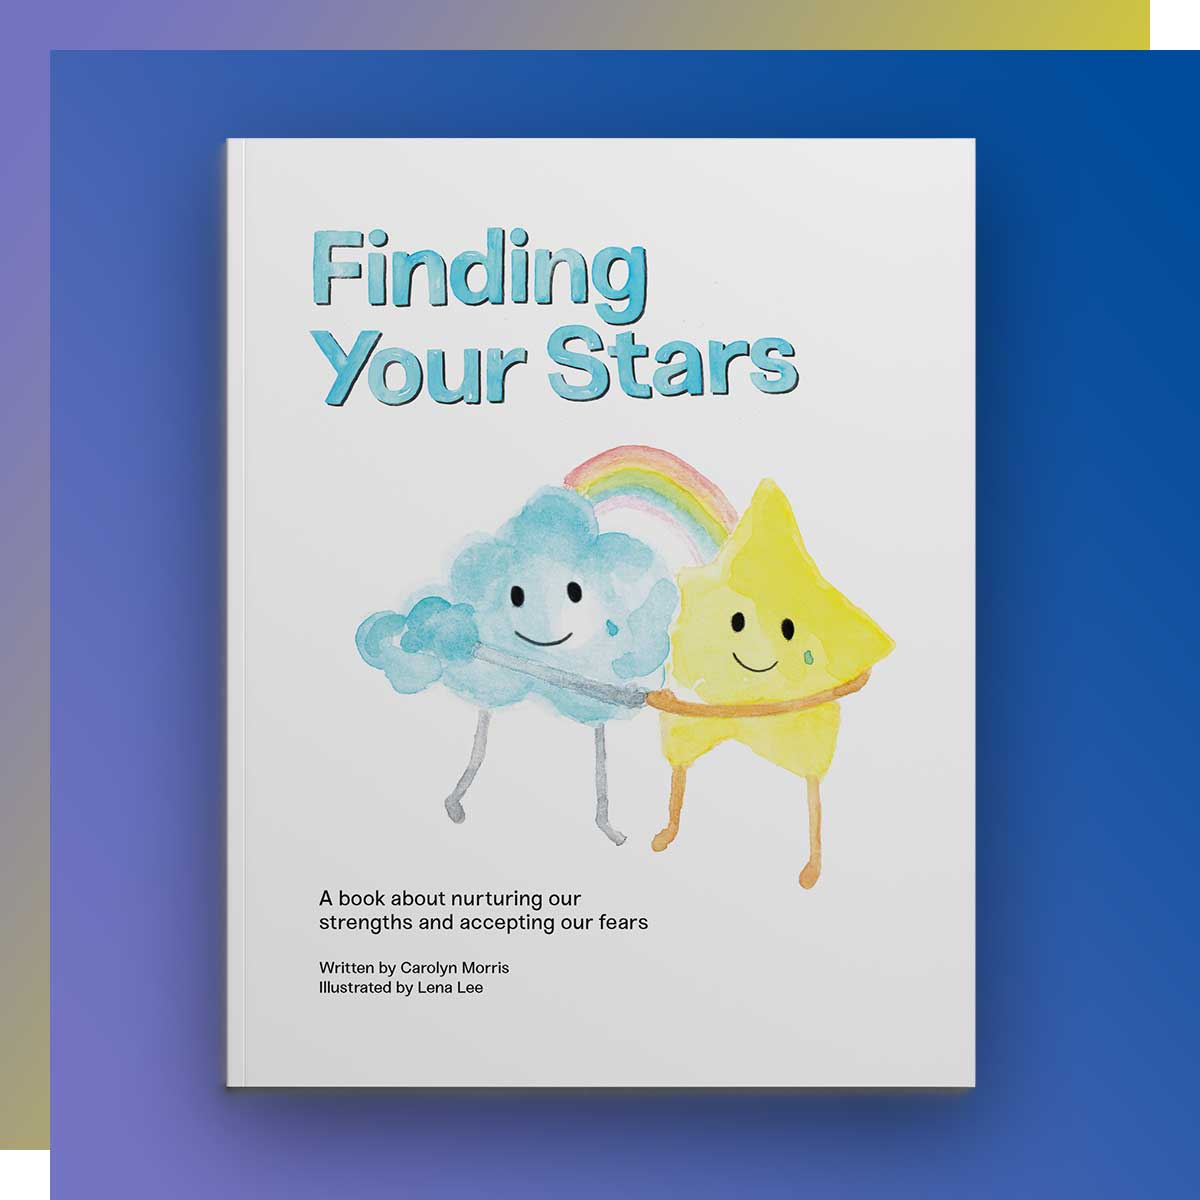 Finding Your Stars: A children’s book about nurturing our strengths and accepting our fears by Carolyn Morris